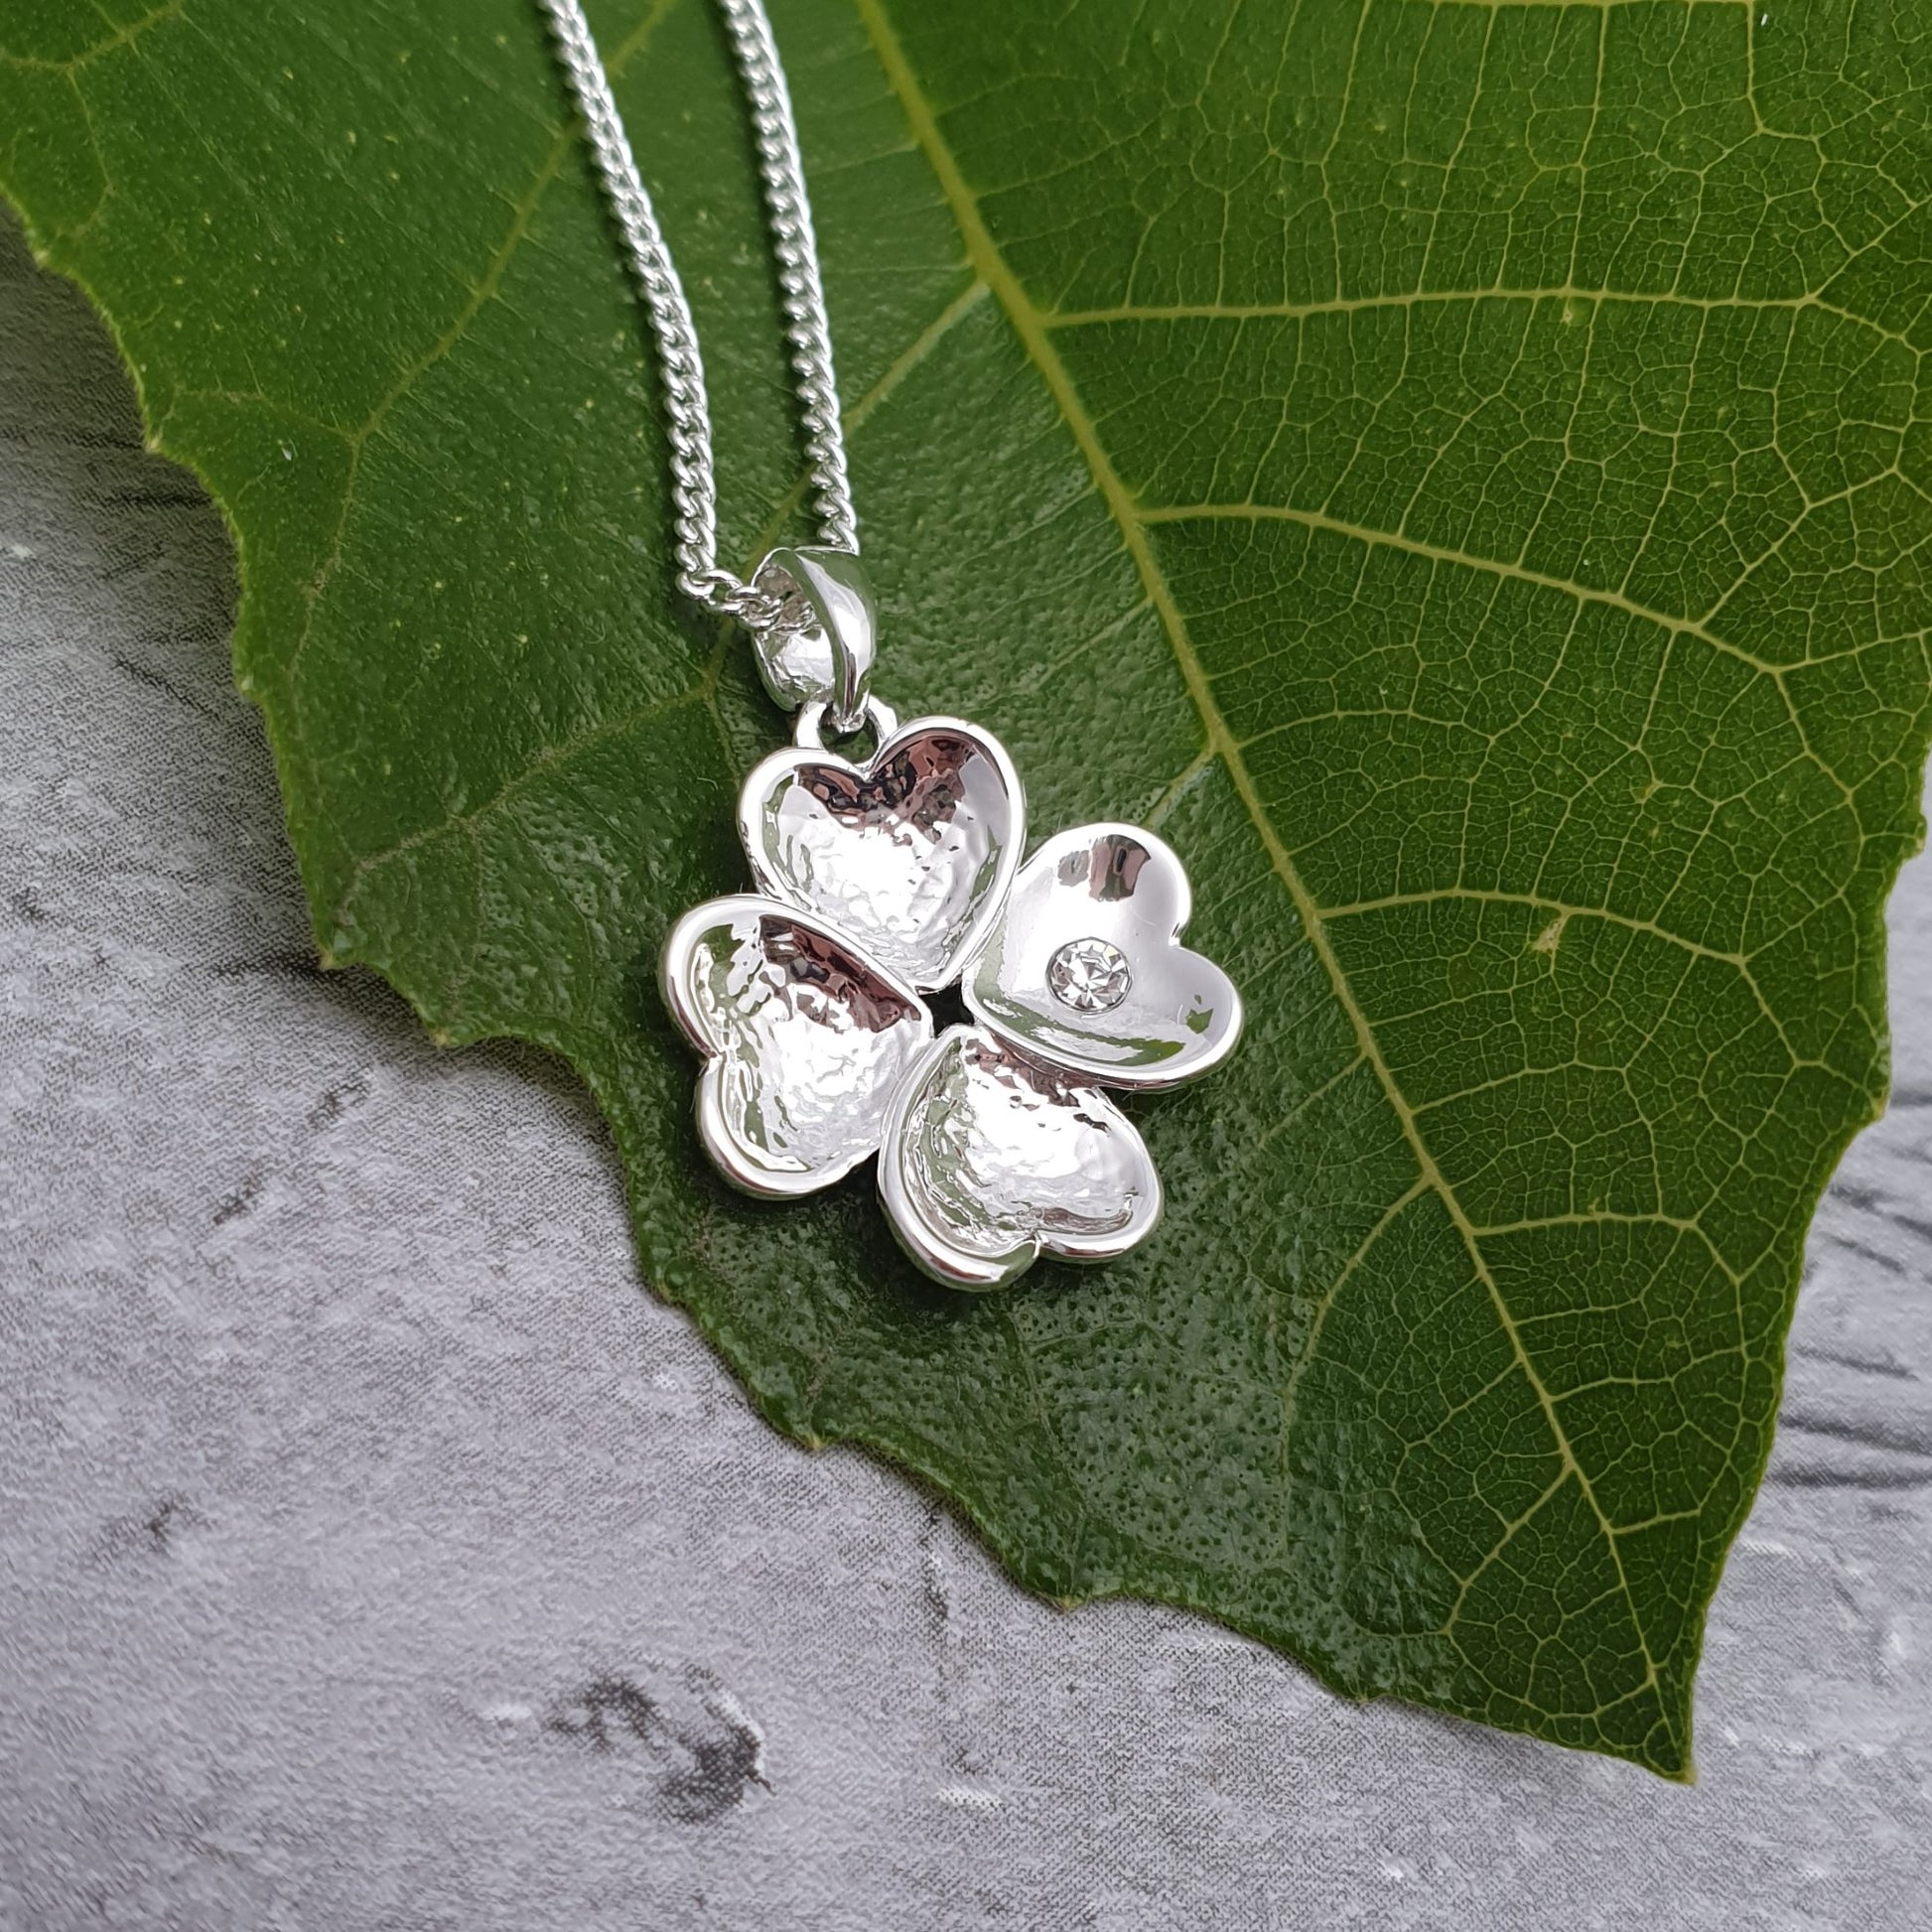 Four Love hearts conjoined to make a 4 leaf clover pendant necklace. Finished with a diamante crystal.